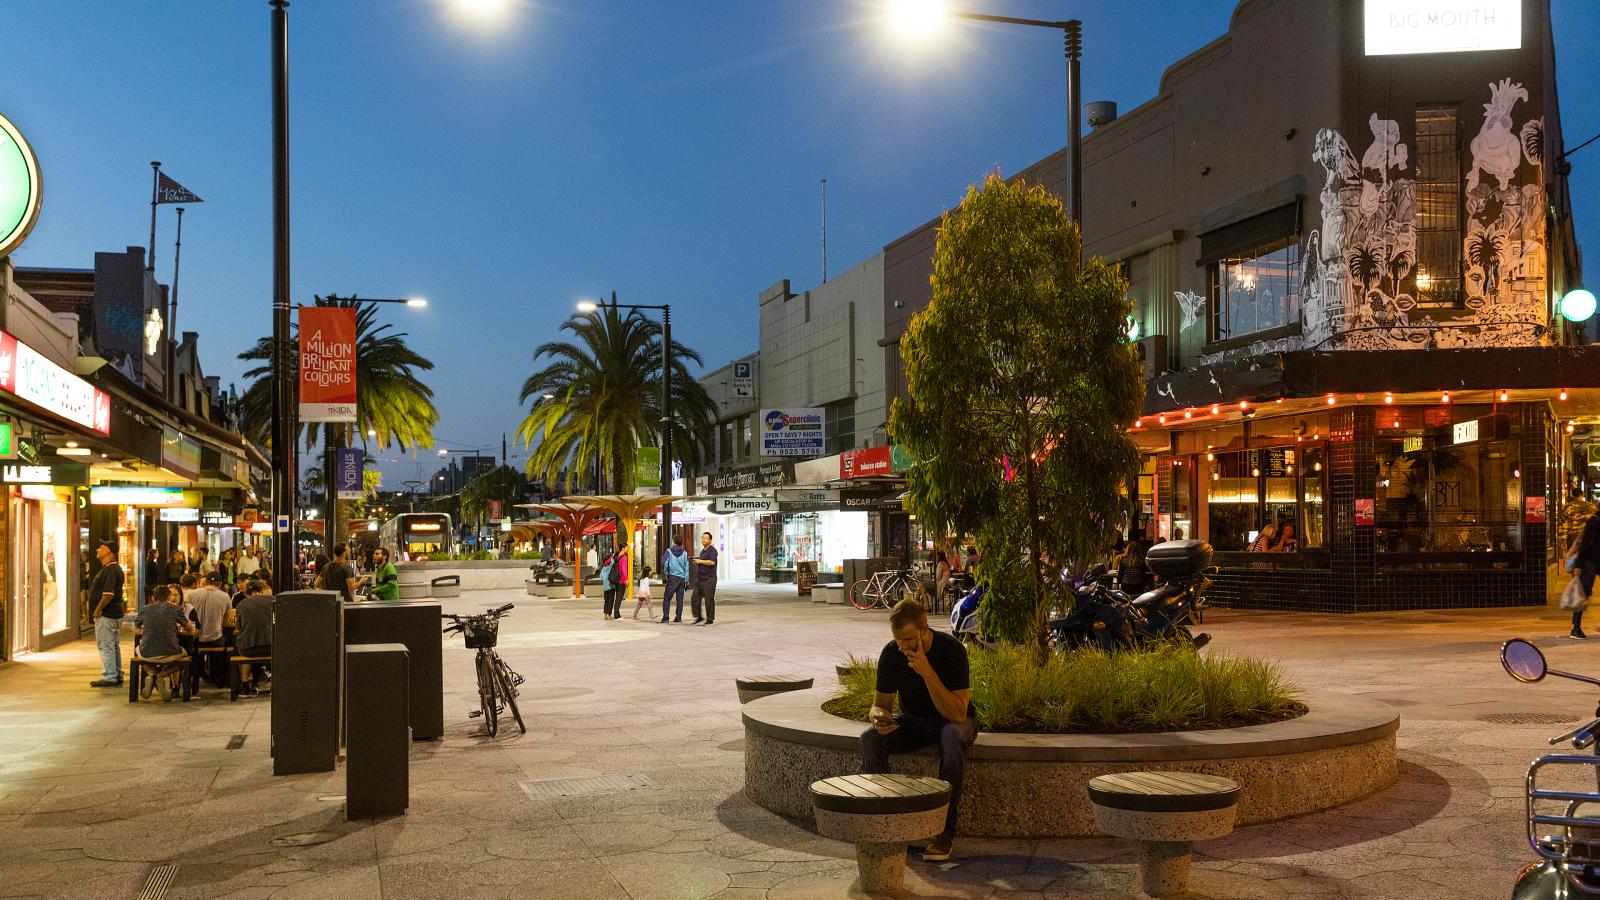 A bustling city street at dusk with shops, cafes, and restaurants. People sit and walk along the pedestrian area of Acland Street, illuminated by streetlights. A person sits on a bench near a tree in the foreground. Palm trees and modern buildings line the background in St Kilda.